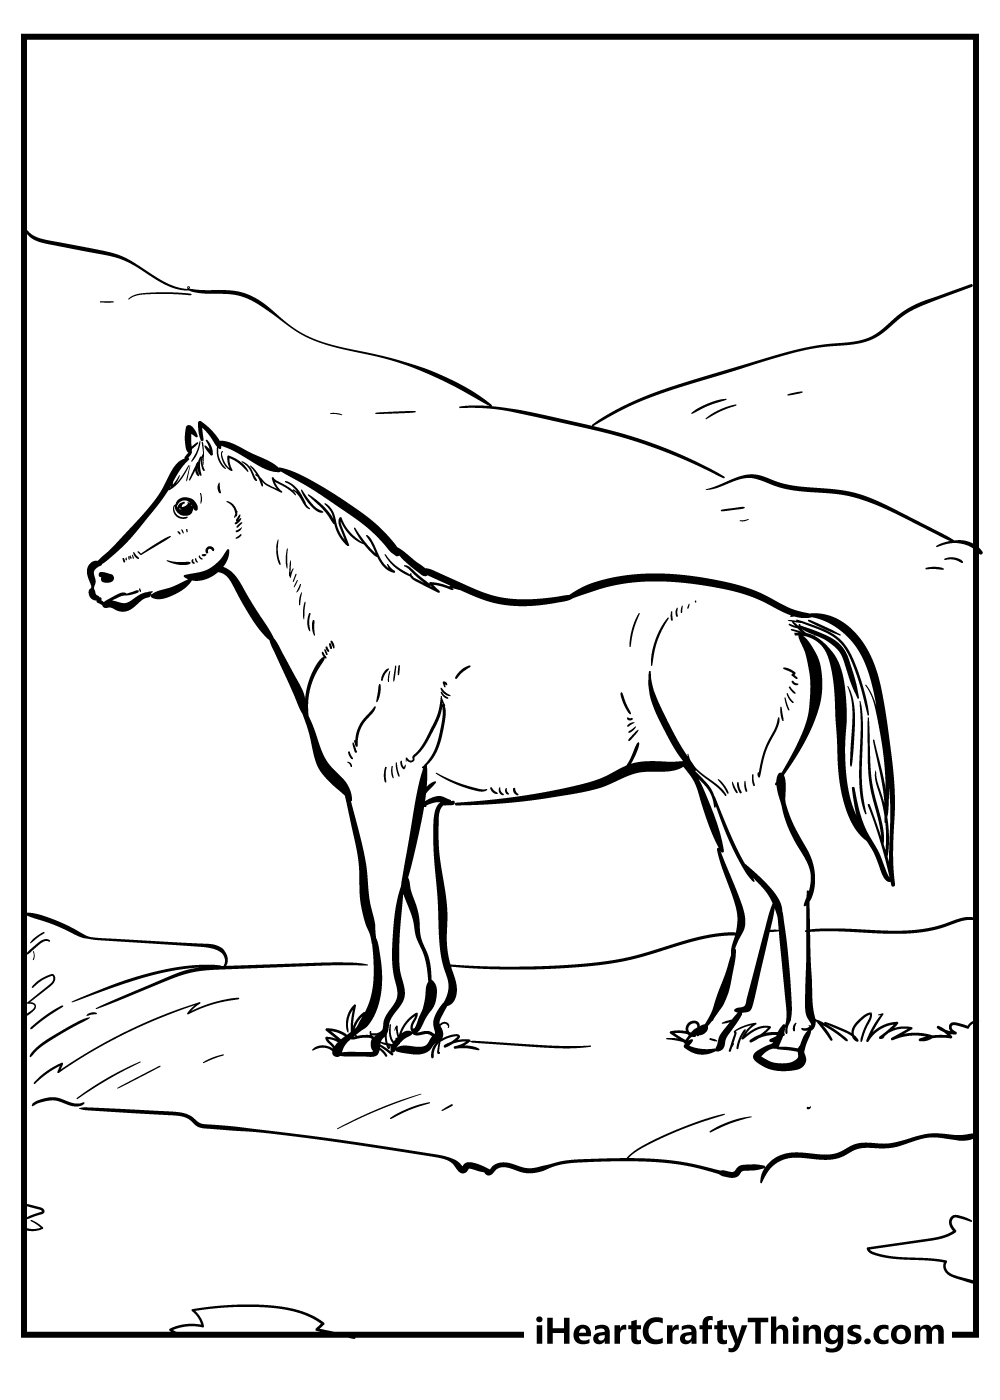 Charming Unique Horse Coloring Pages free printable